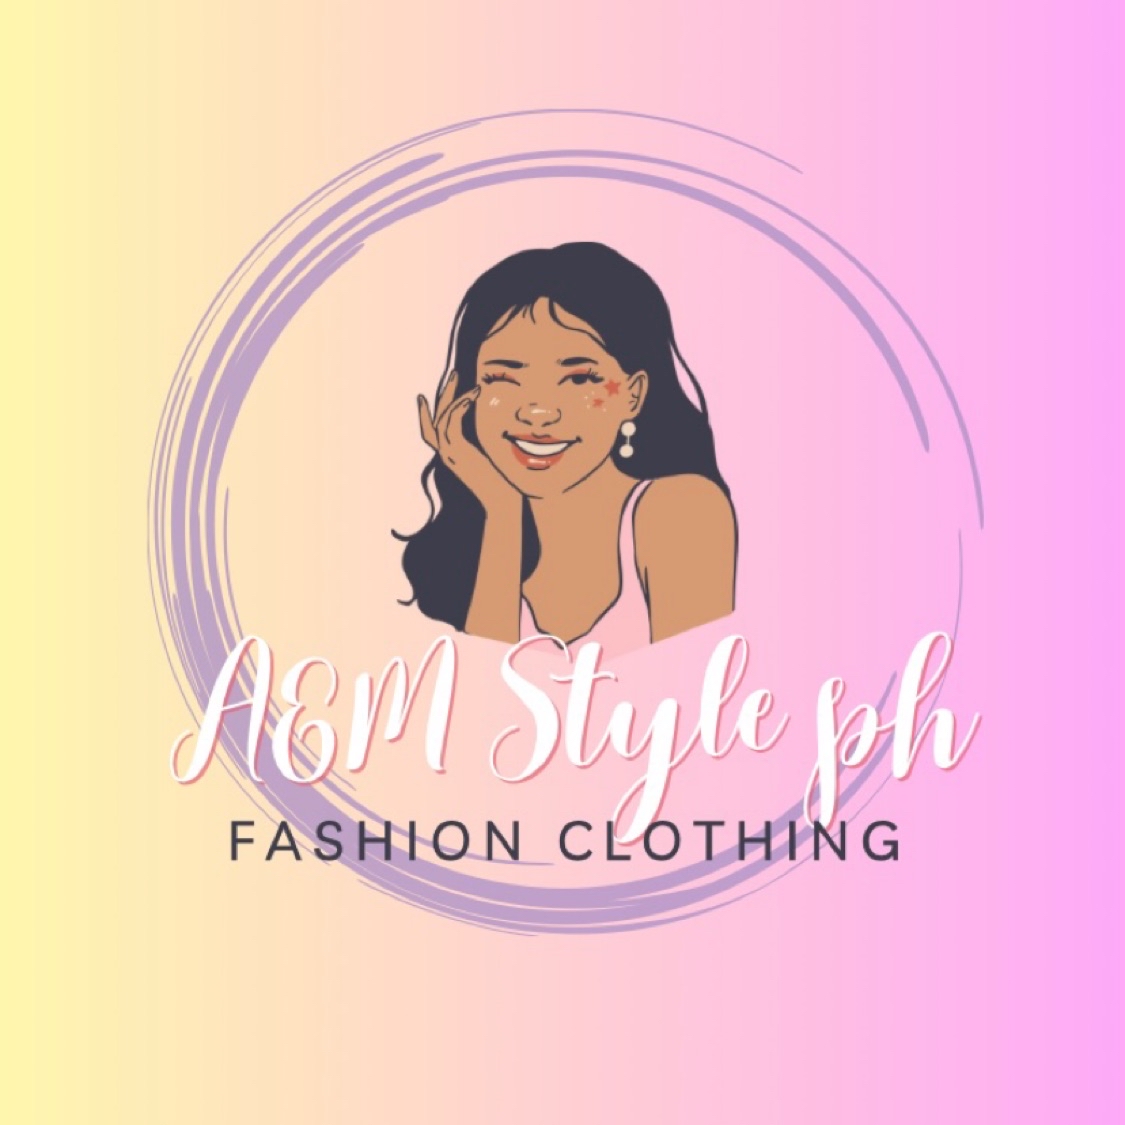 A&M styleph, Online Shop | Shopee Philippines